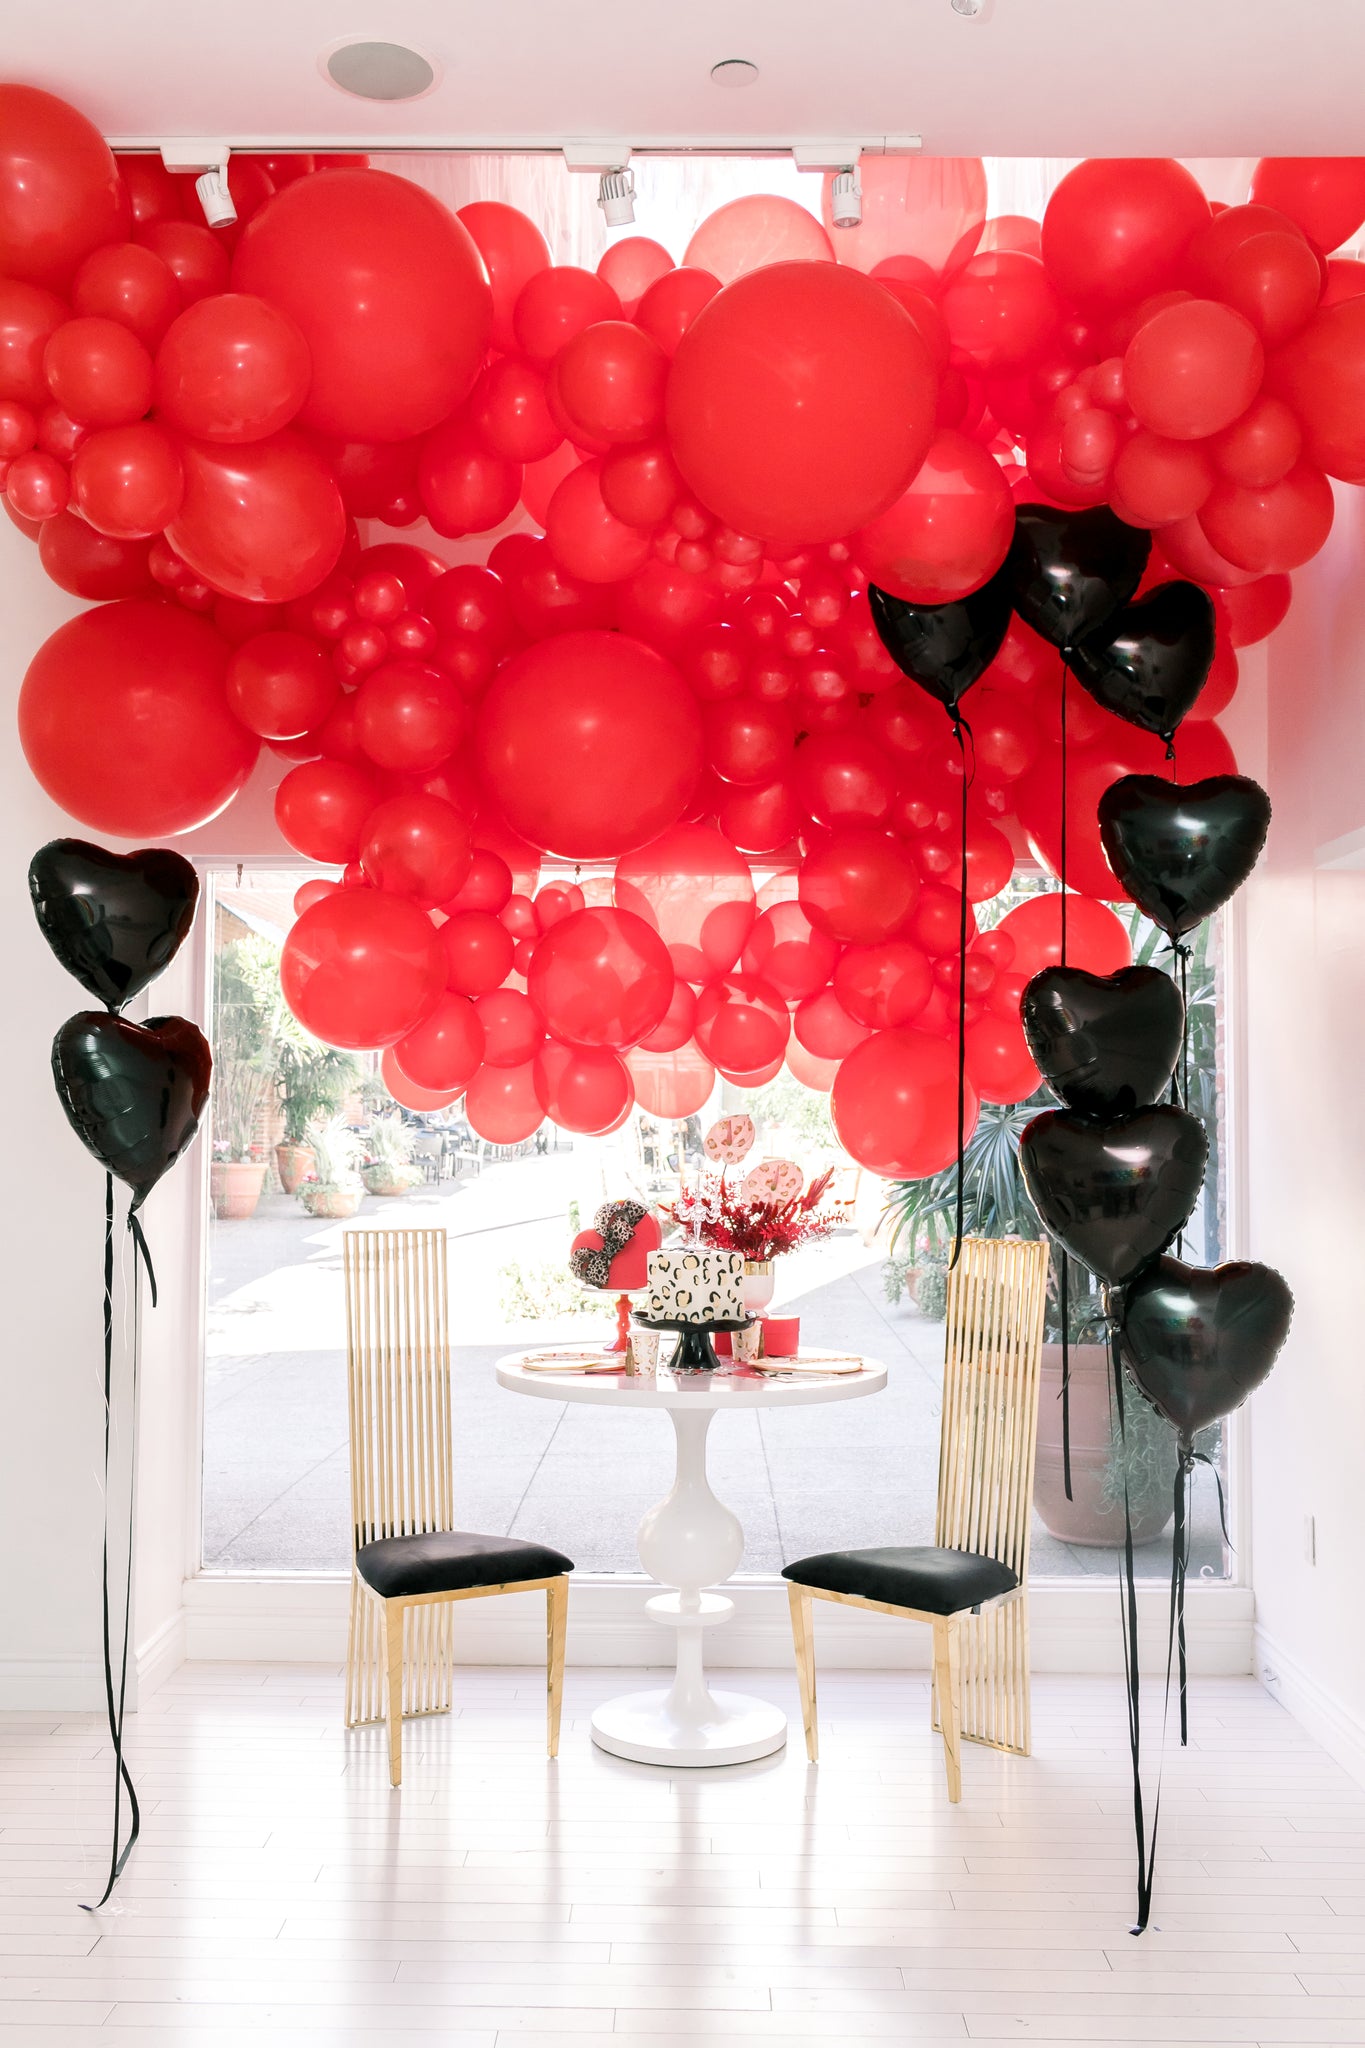 Red and black themed Valentine's Day party